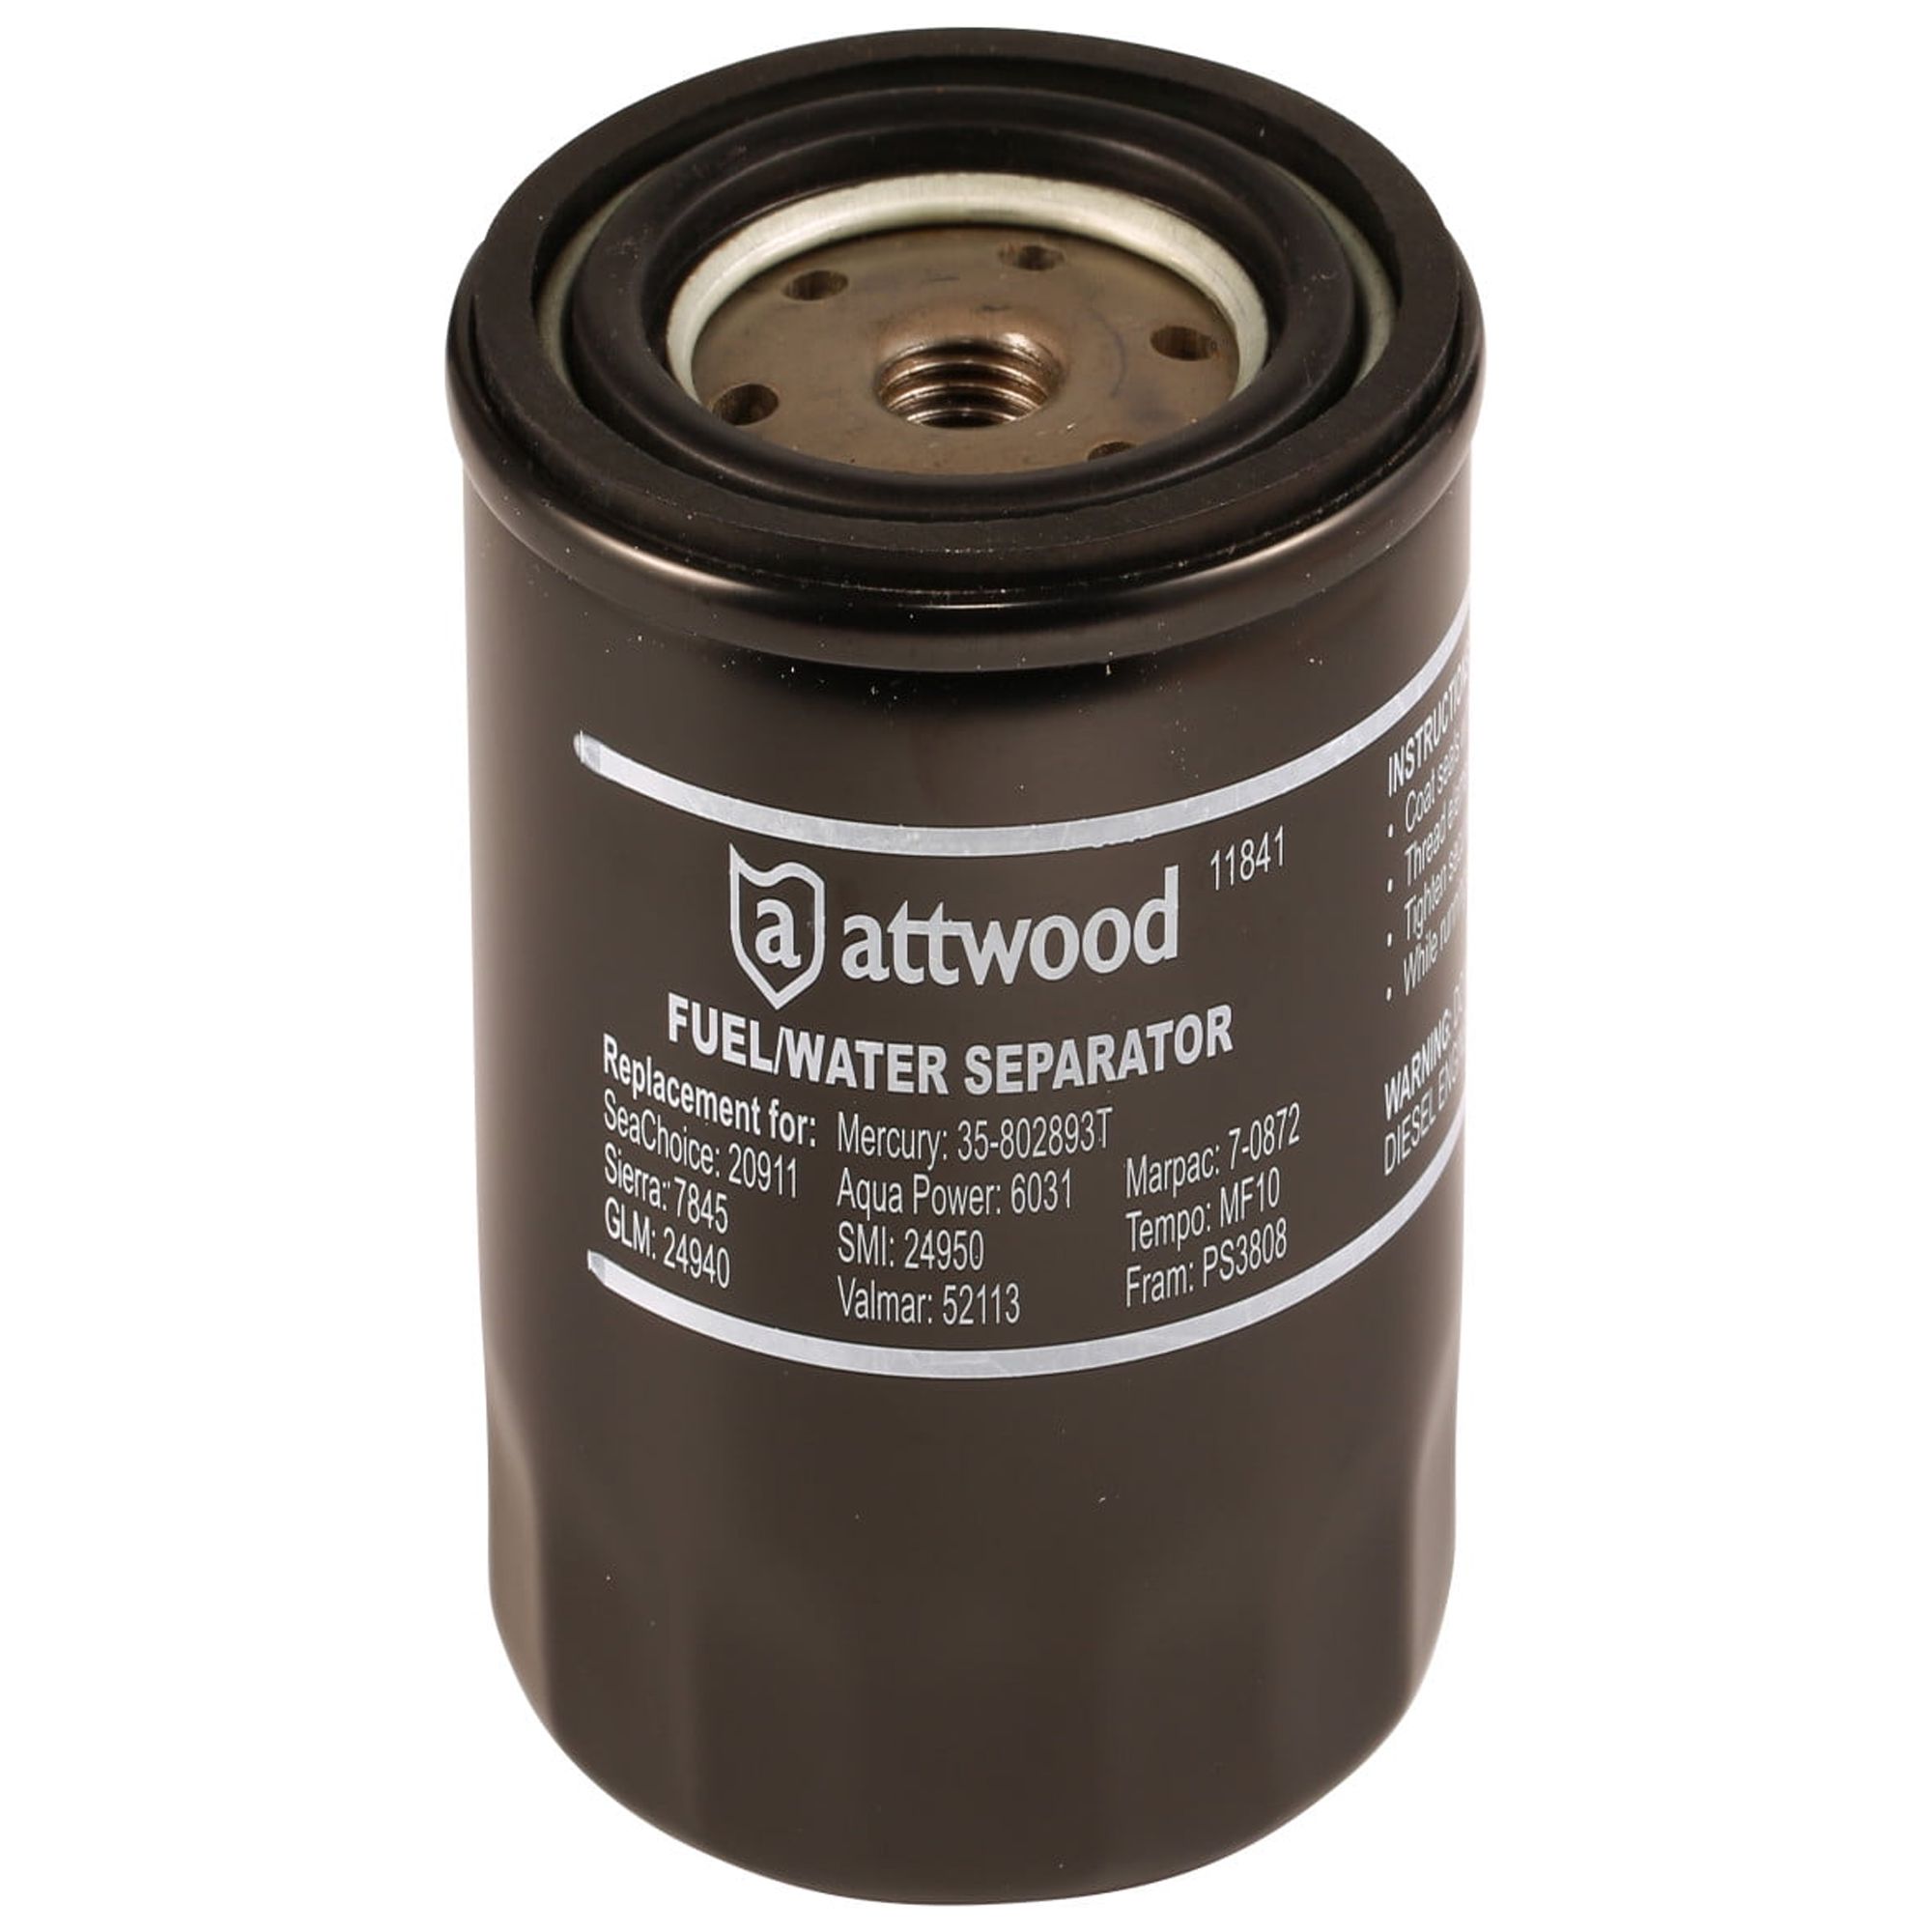 Attwood 11841-4 Universal Marine 10-Micron Fuel/Water Separator Filter with Double Gasket - image 1 of 3